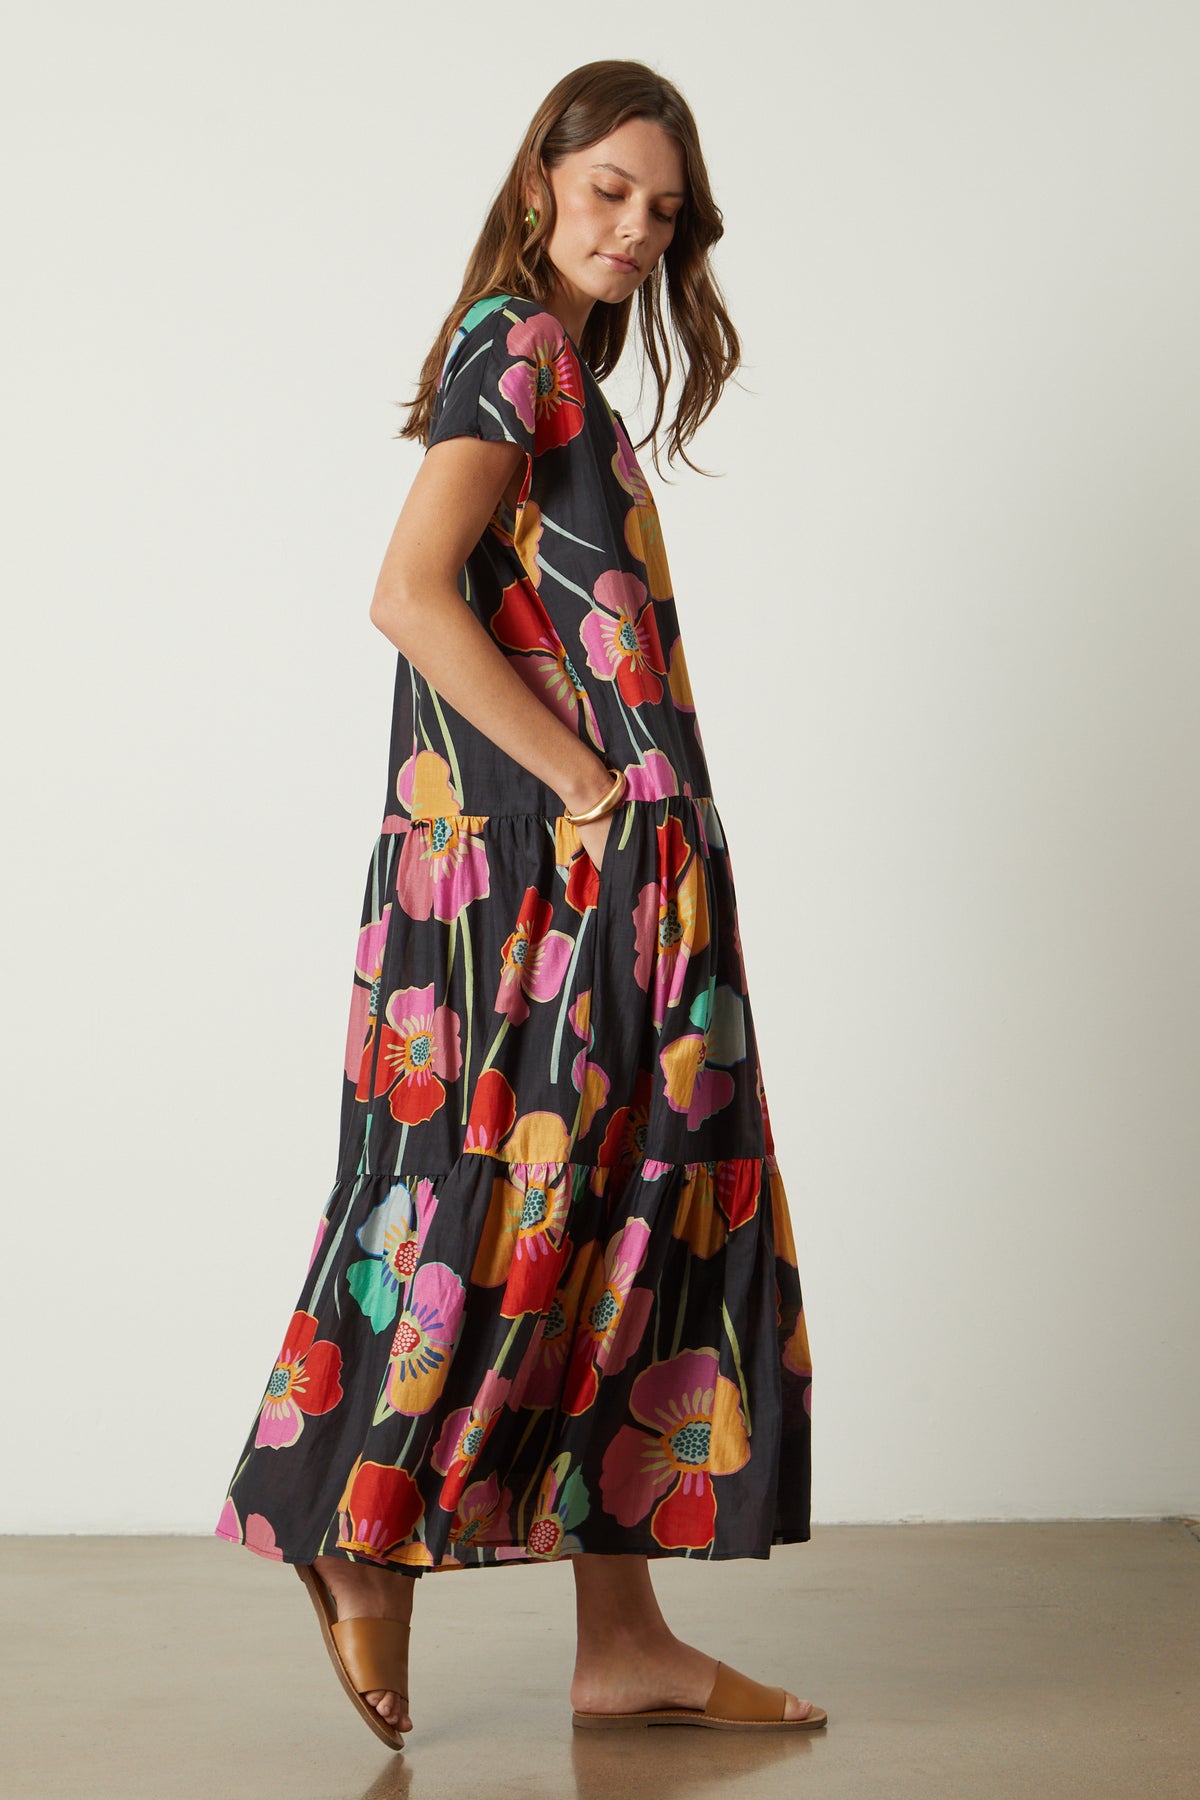 Savannah Maxi Dress in bold floral print on black background full length side untied model with hand in dress pocket-26233476448449